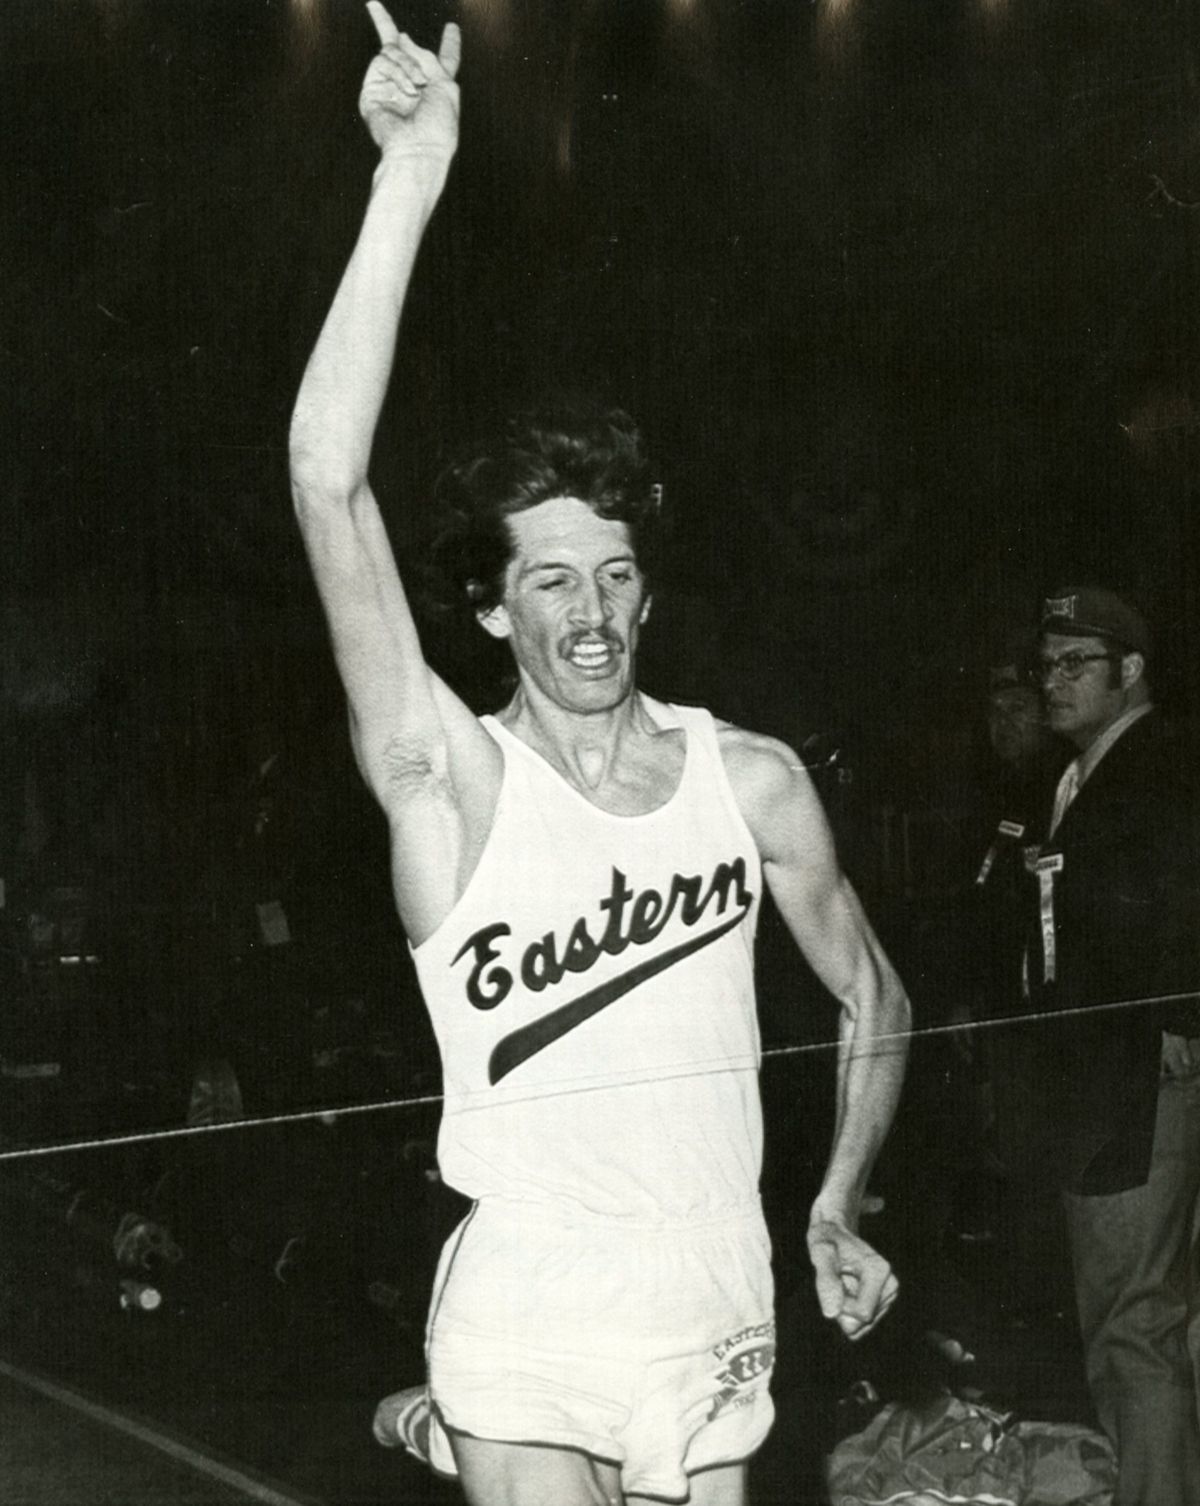 Bob Maplestone ran the fastest mile in Spokane County in 1977. That record could finally fall on Saturday evening. (File)